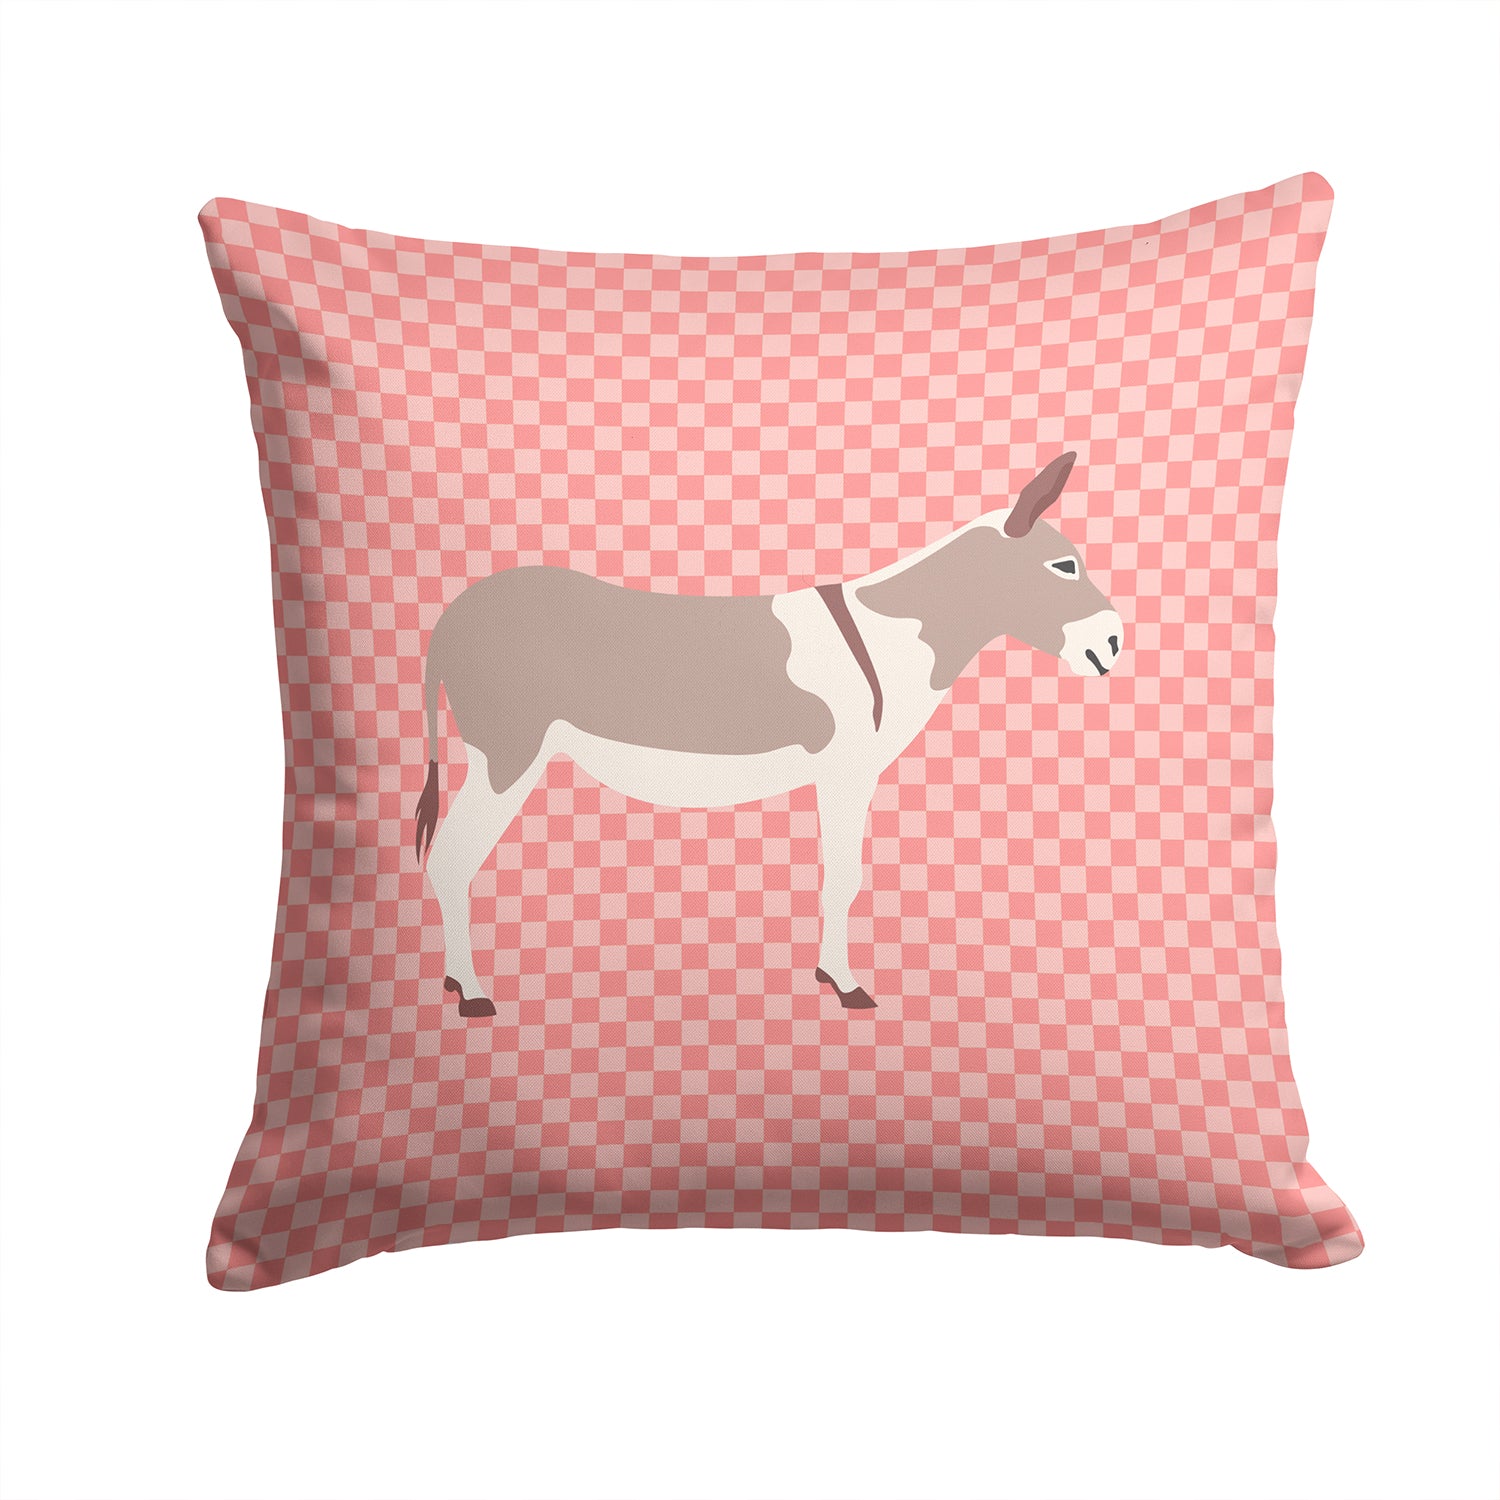 Australian Teamster Donkey Pink Check Fabric Decorative Pillow BB7846PW1414 - the-store.com